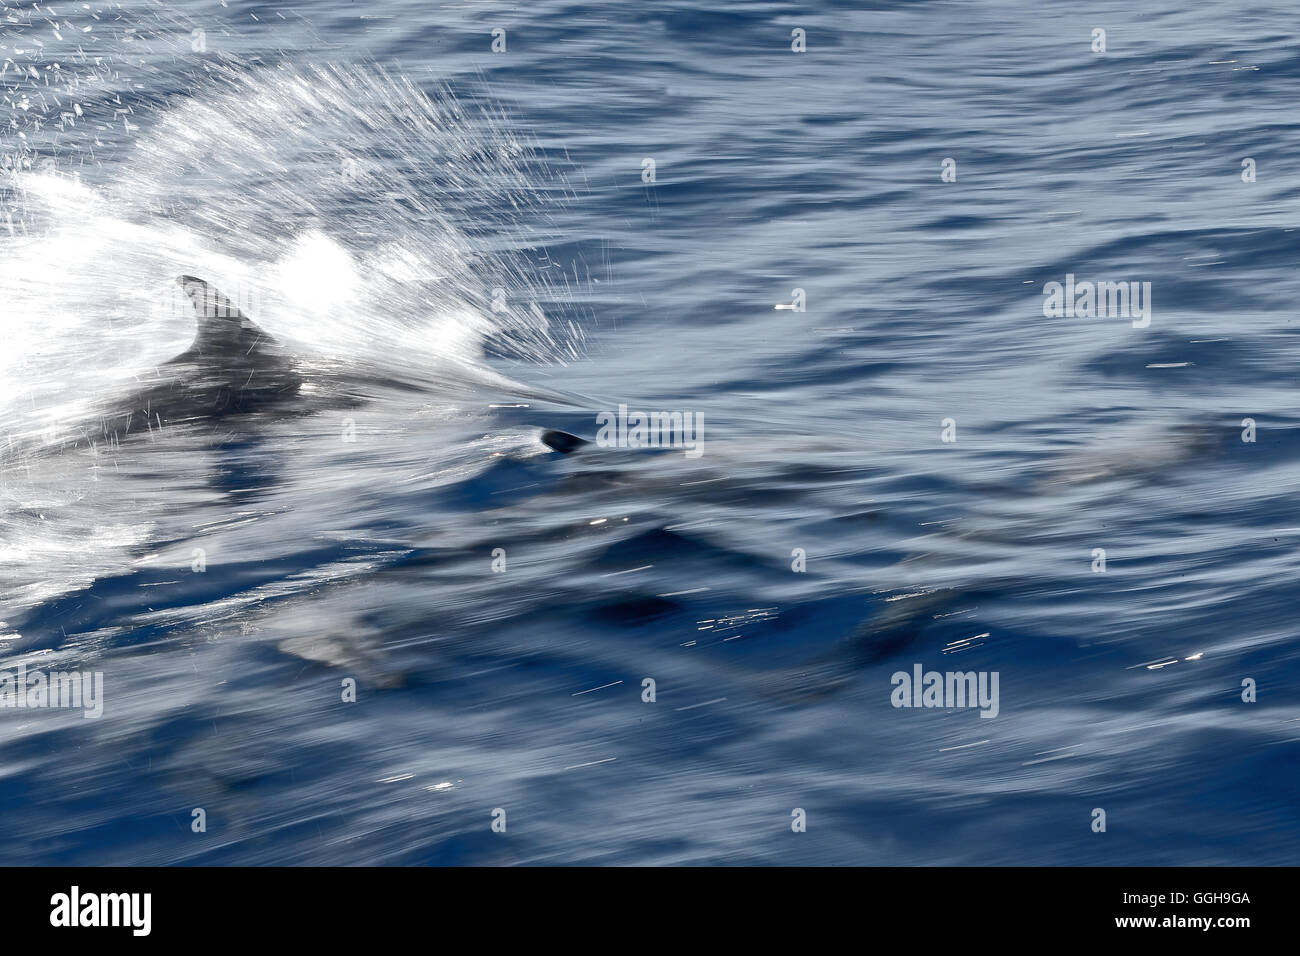 Swimming dolphins, Dominica, Lesser Antilles, Caribbean Stock Photo